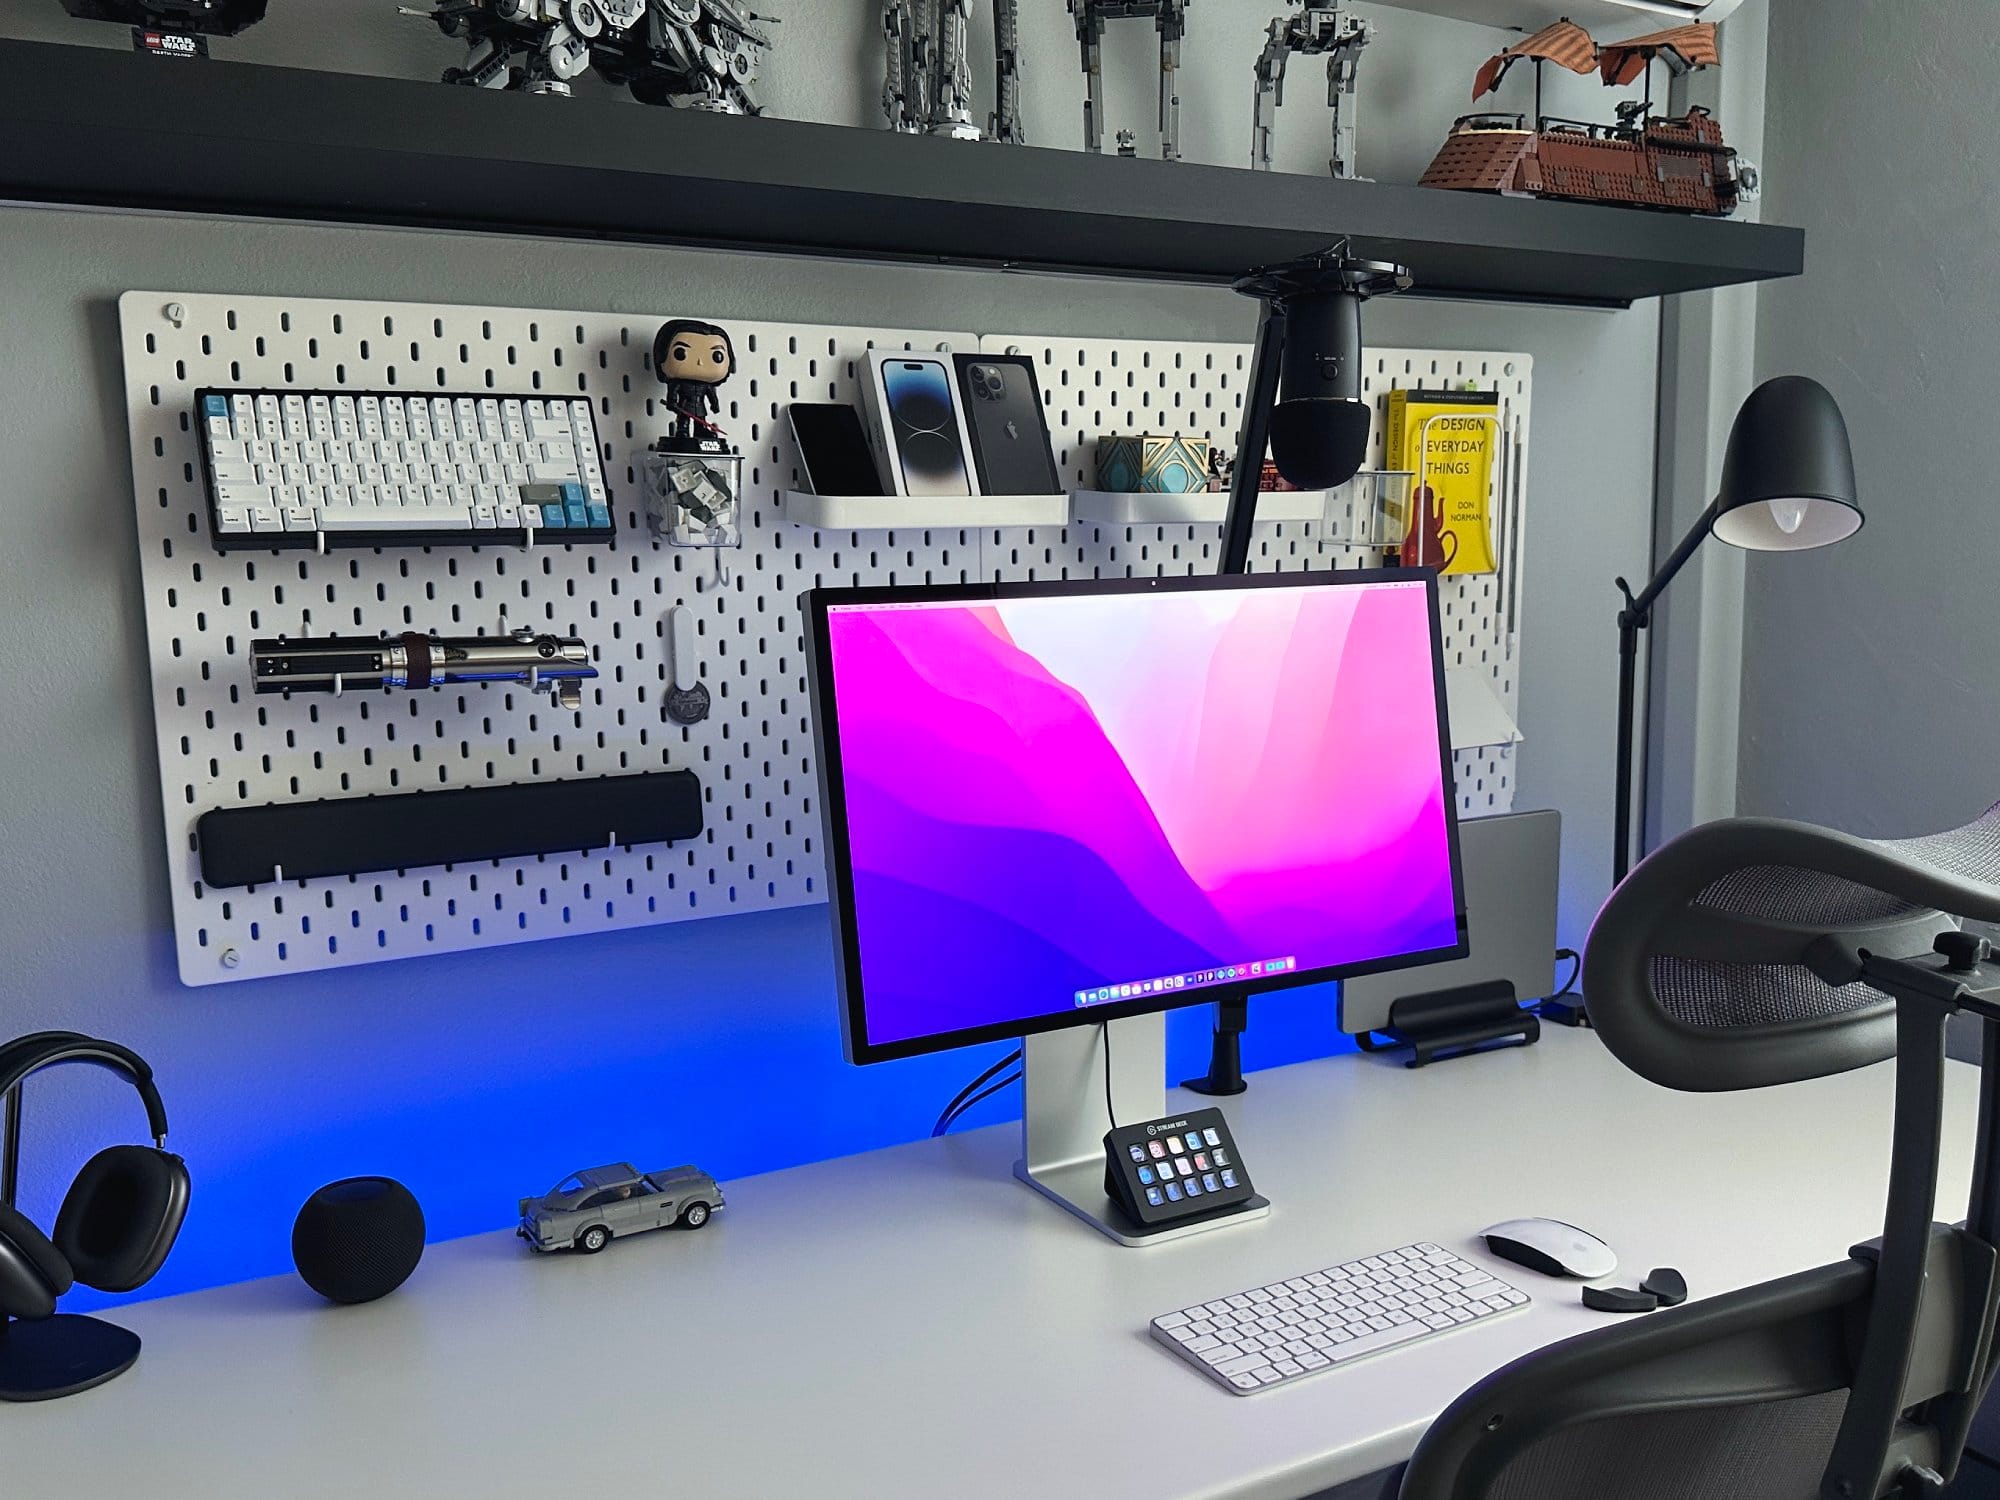 An organised workspace with a monitor, a keyboard, a stream deck, a microphone, a smartwatch, wireless earbuds, a model car, and a book titled The Design of Everyday Things on a shelf above